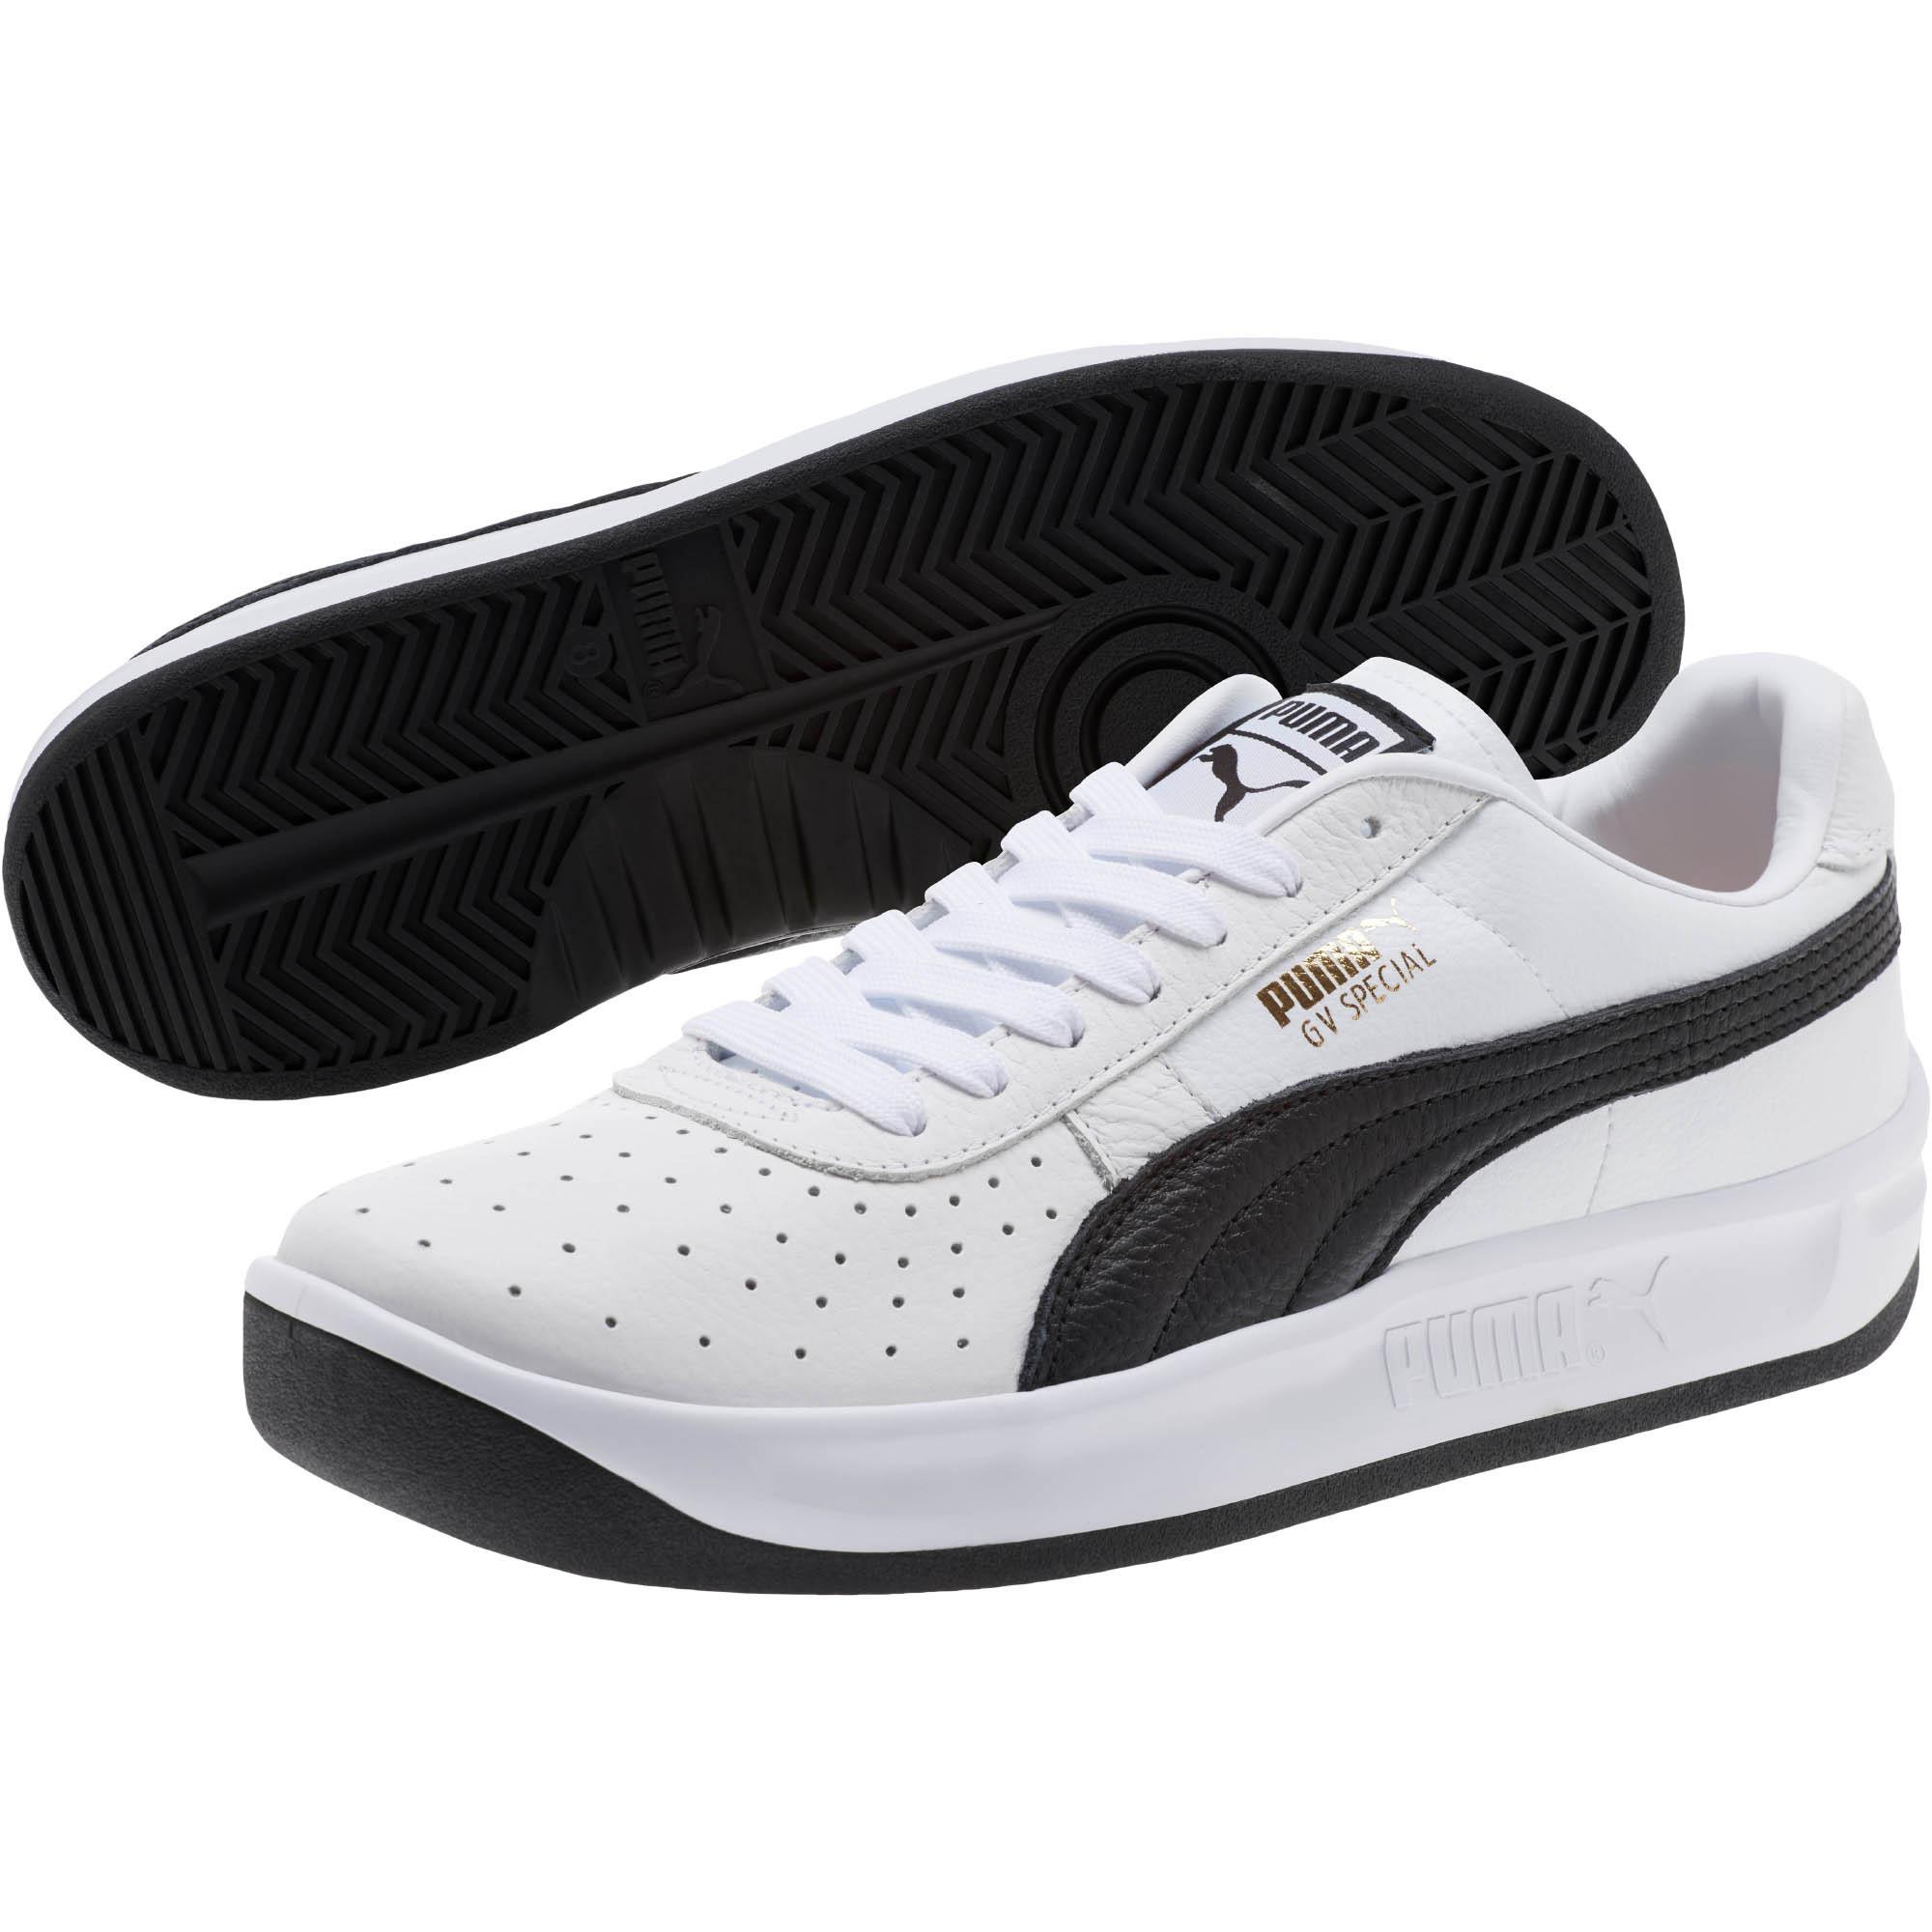 PUMA Leather Gv Special+ Sneakers for Men - Lyst